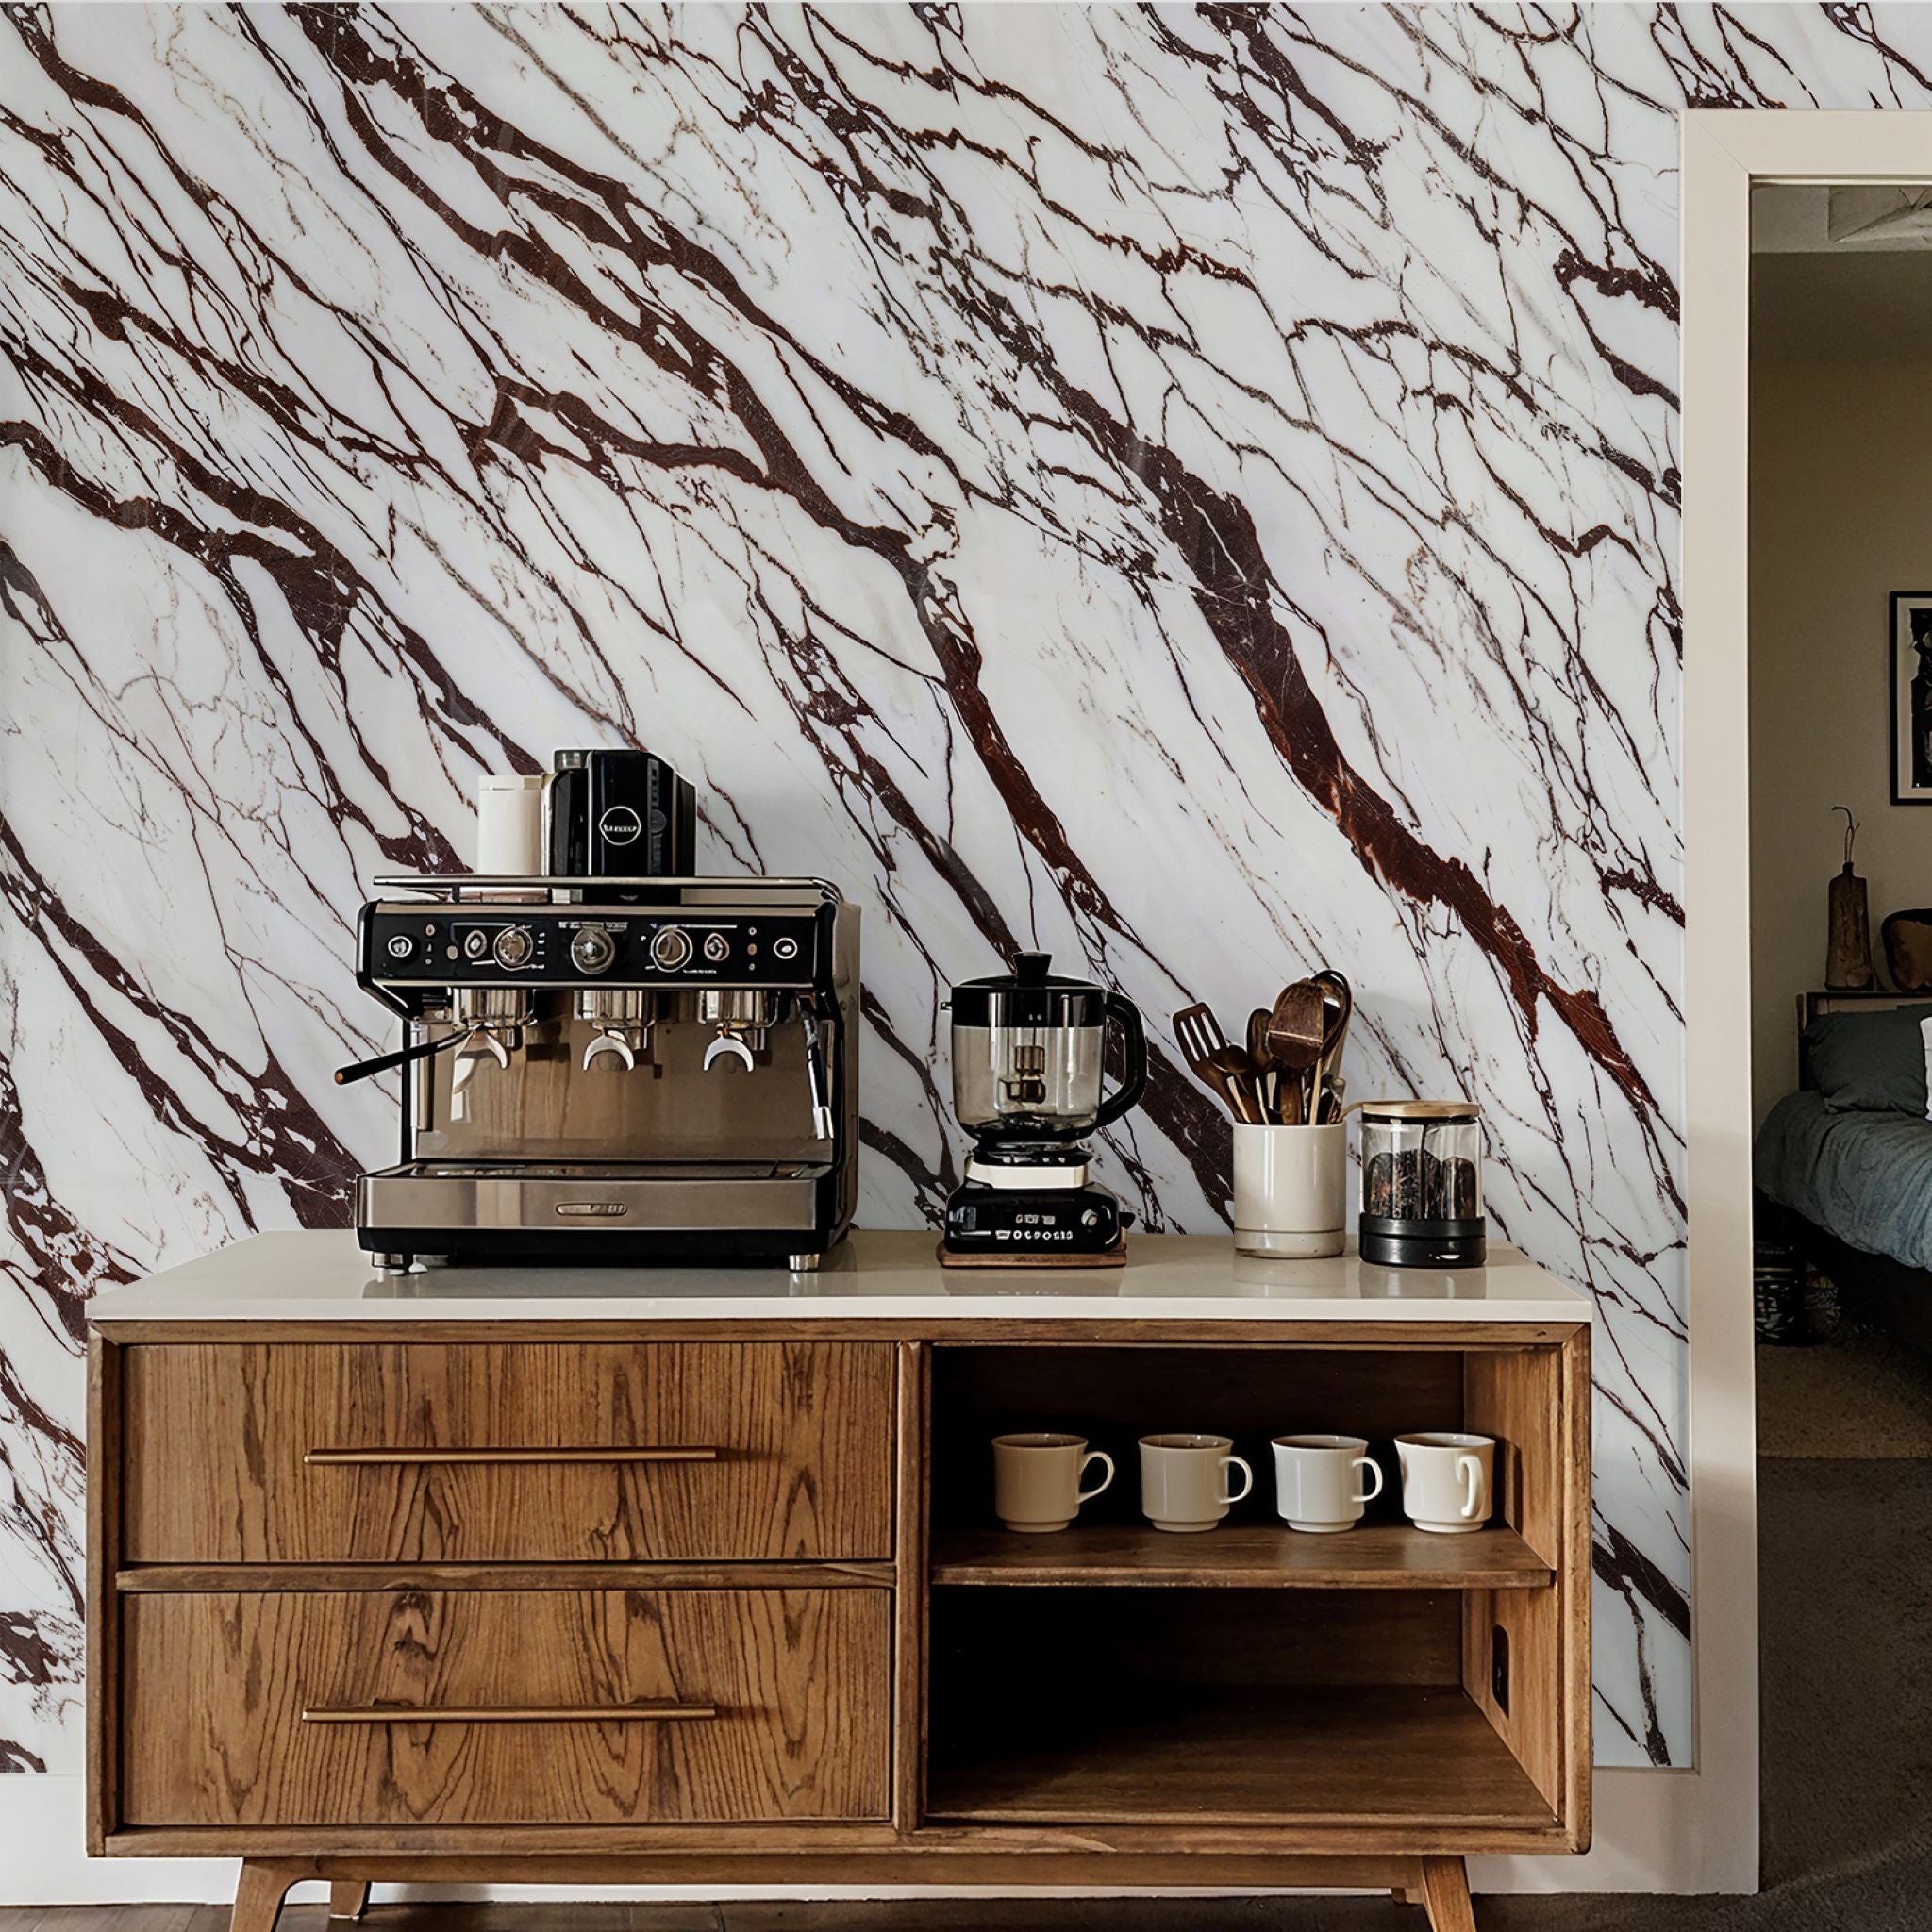 "Calacatta wallpaper by Wall Blush in stylish kitchen, with focus on elegant marble pattern design."